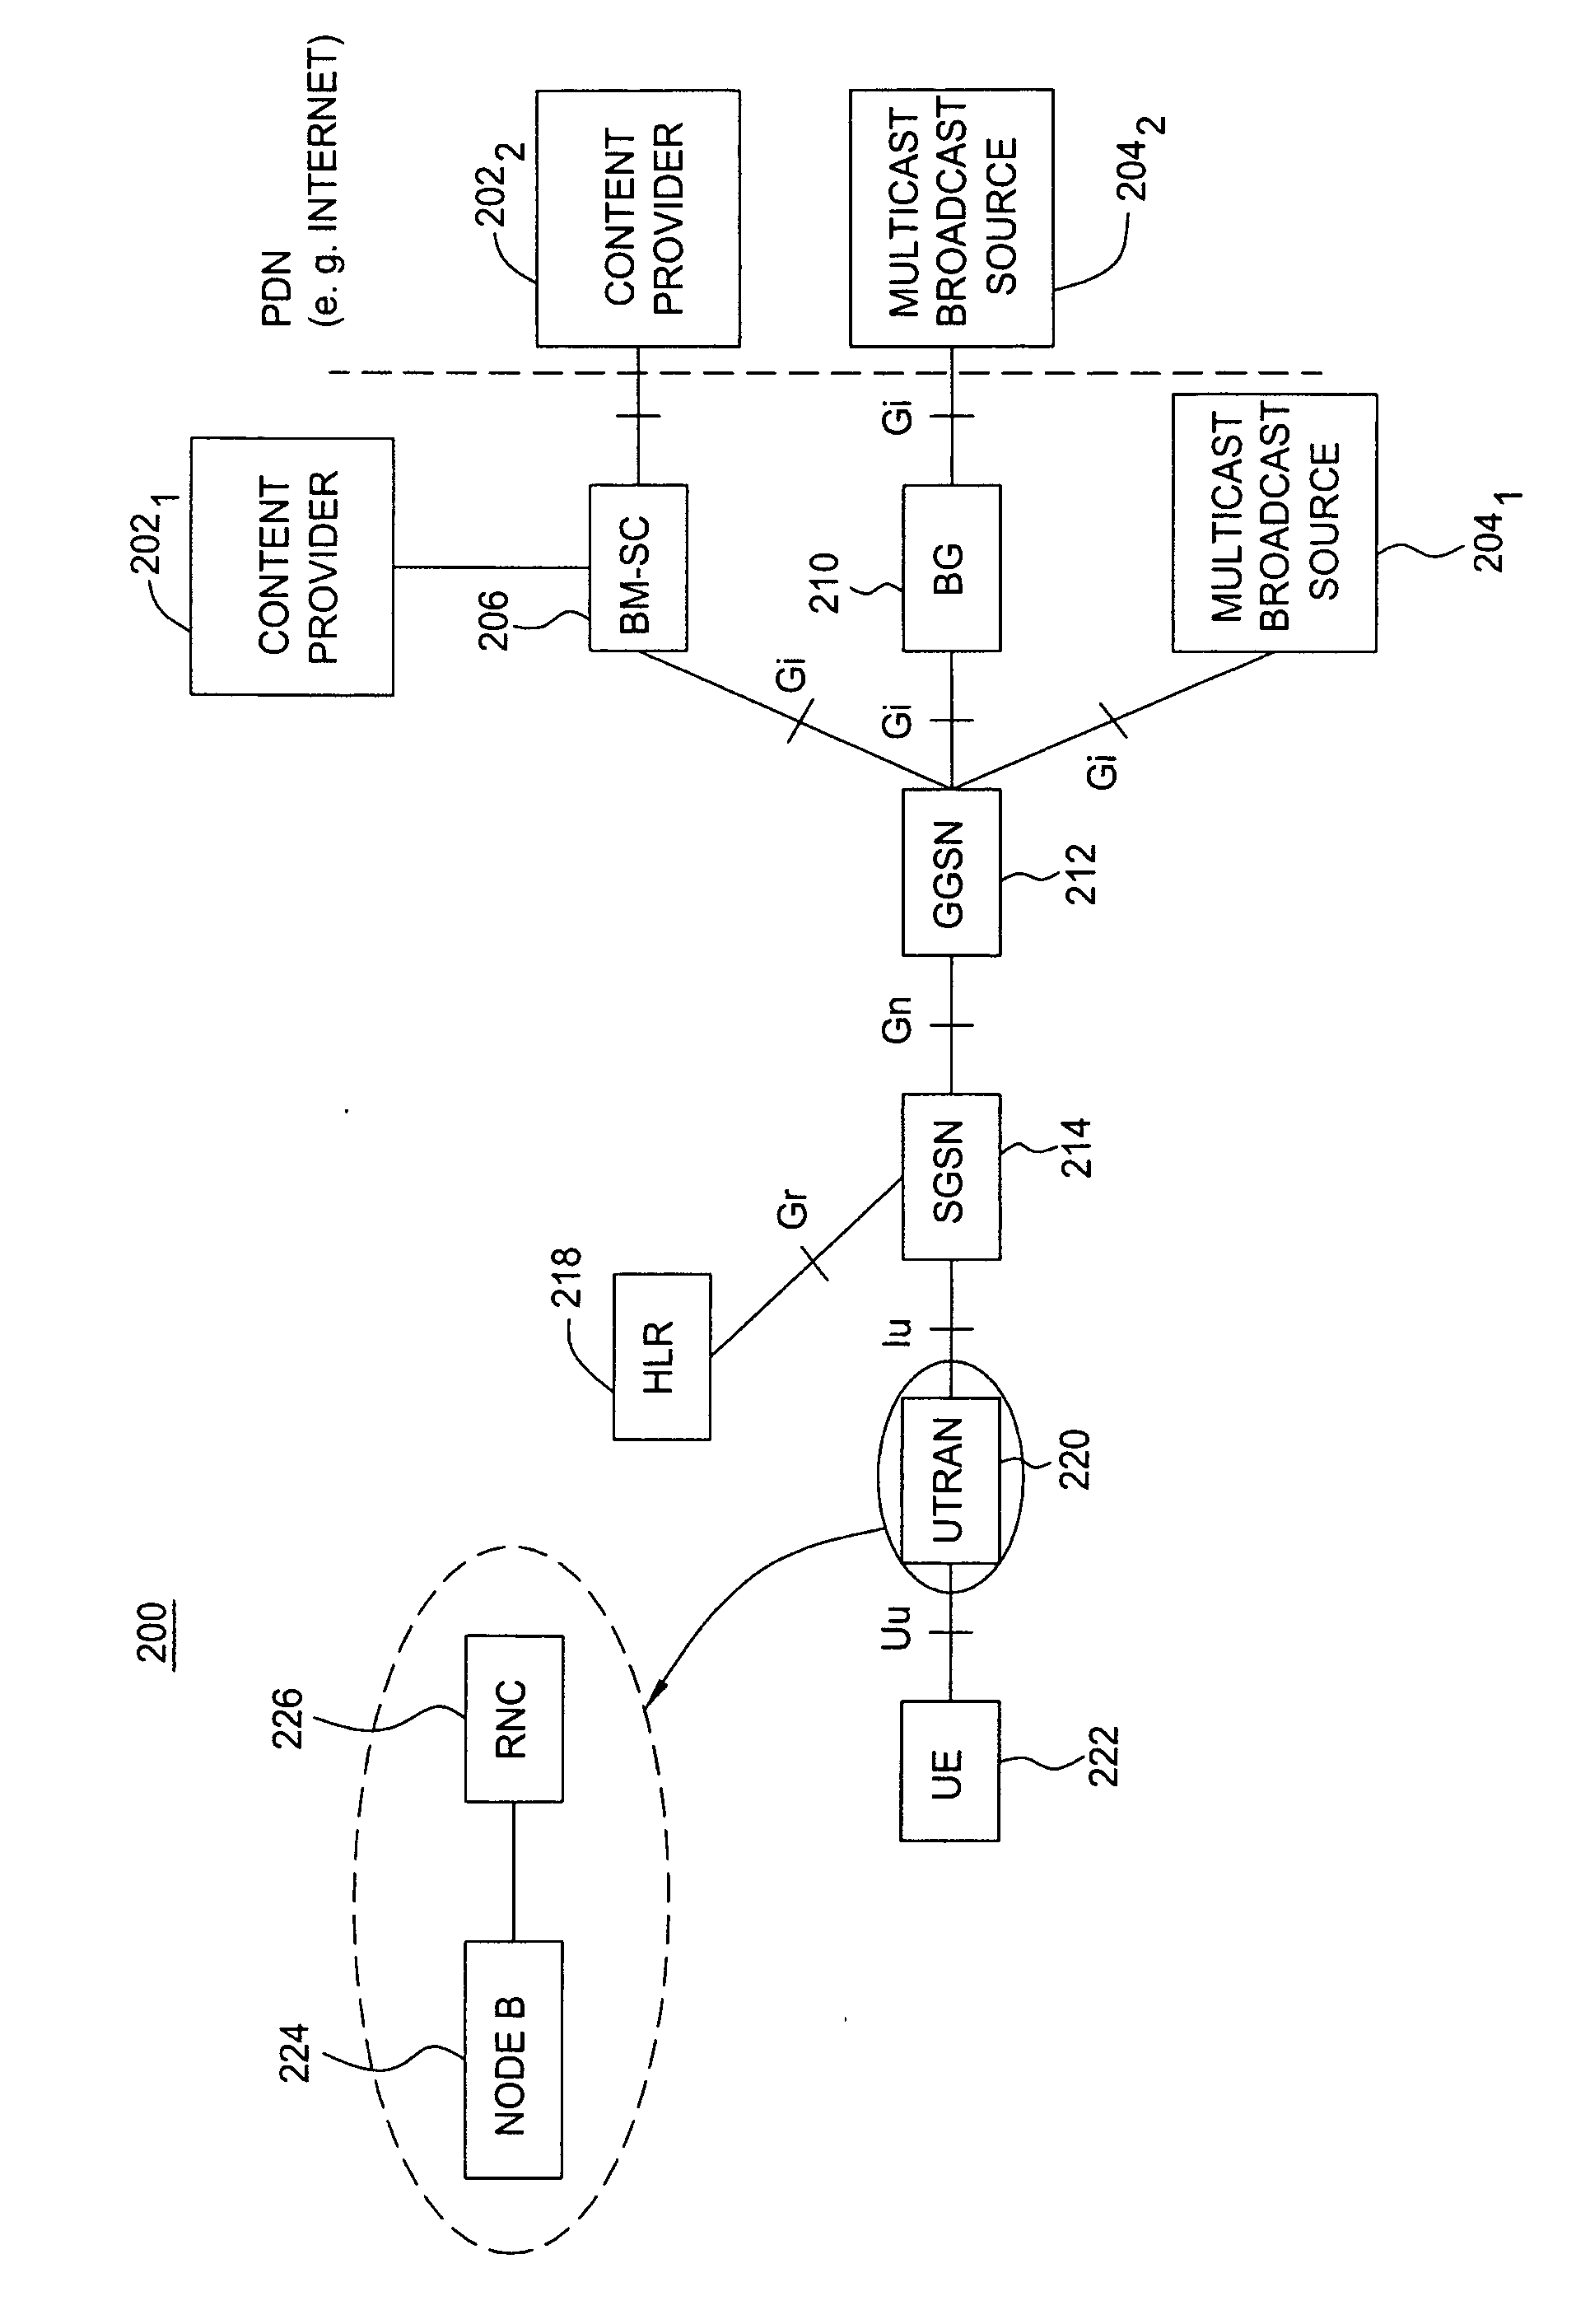 Method and apparatus for providing multicast services in a wireless communication environment